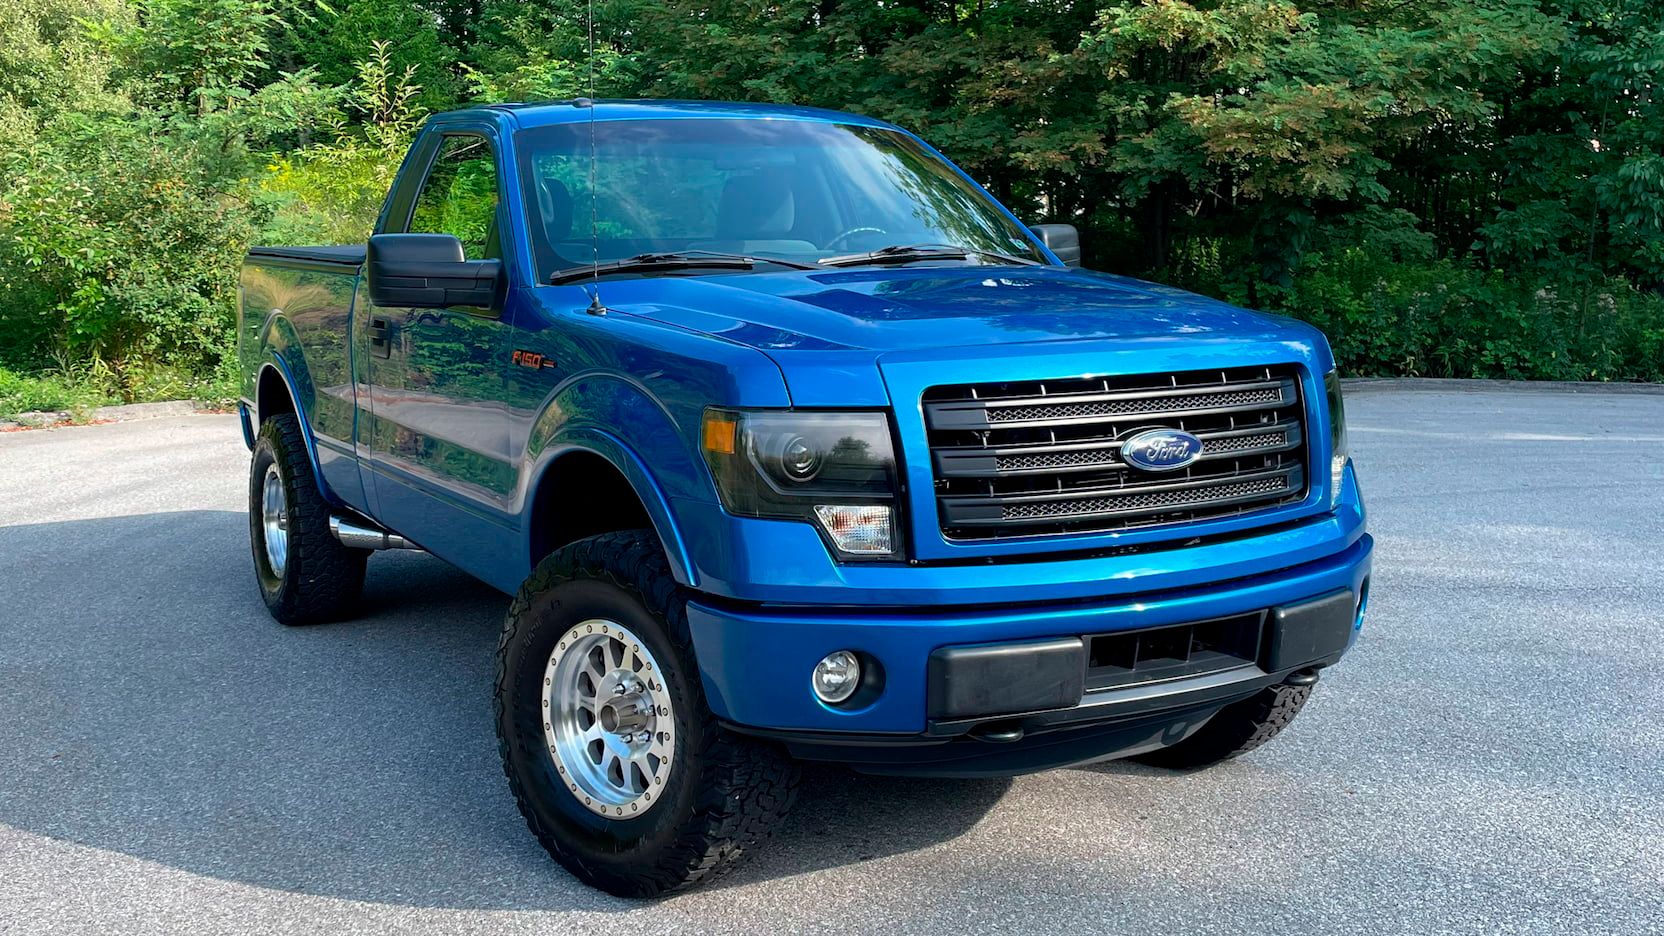 Blue 2011 Ford F-150 on the driveway